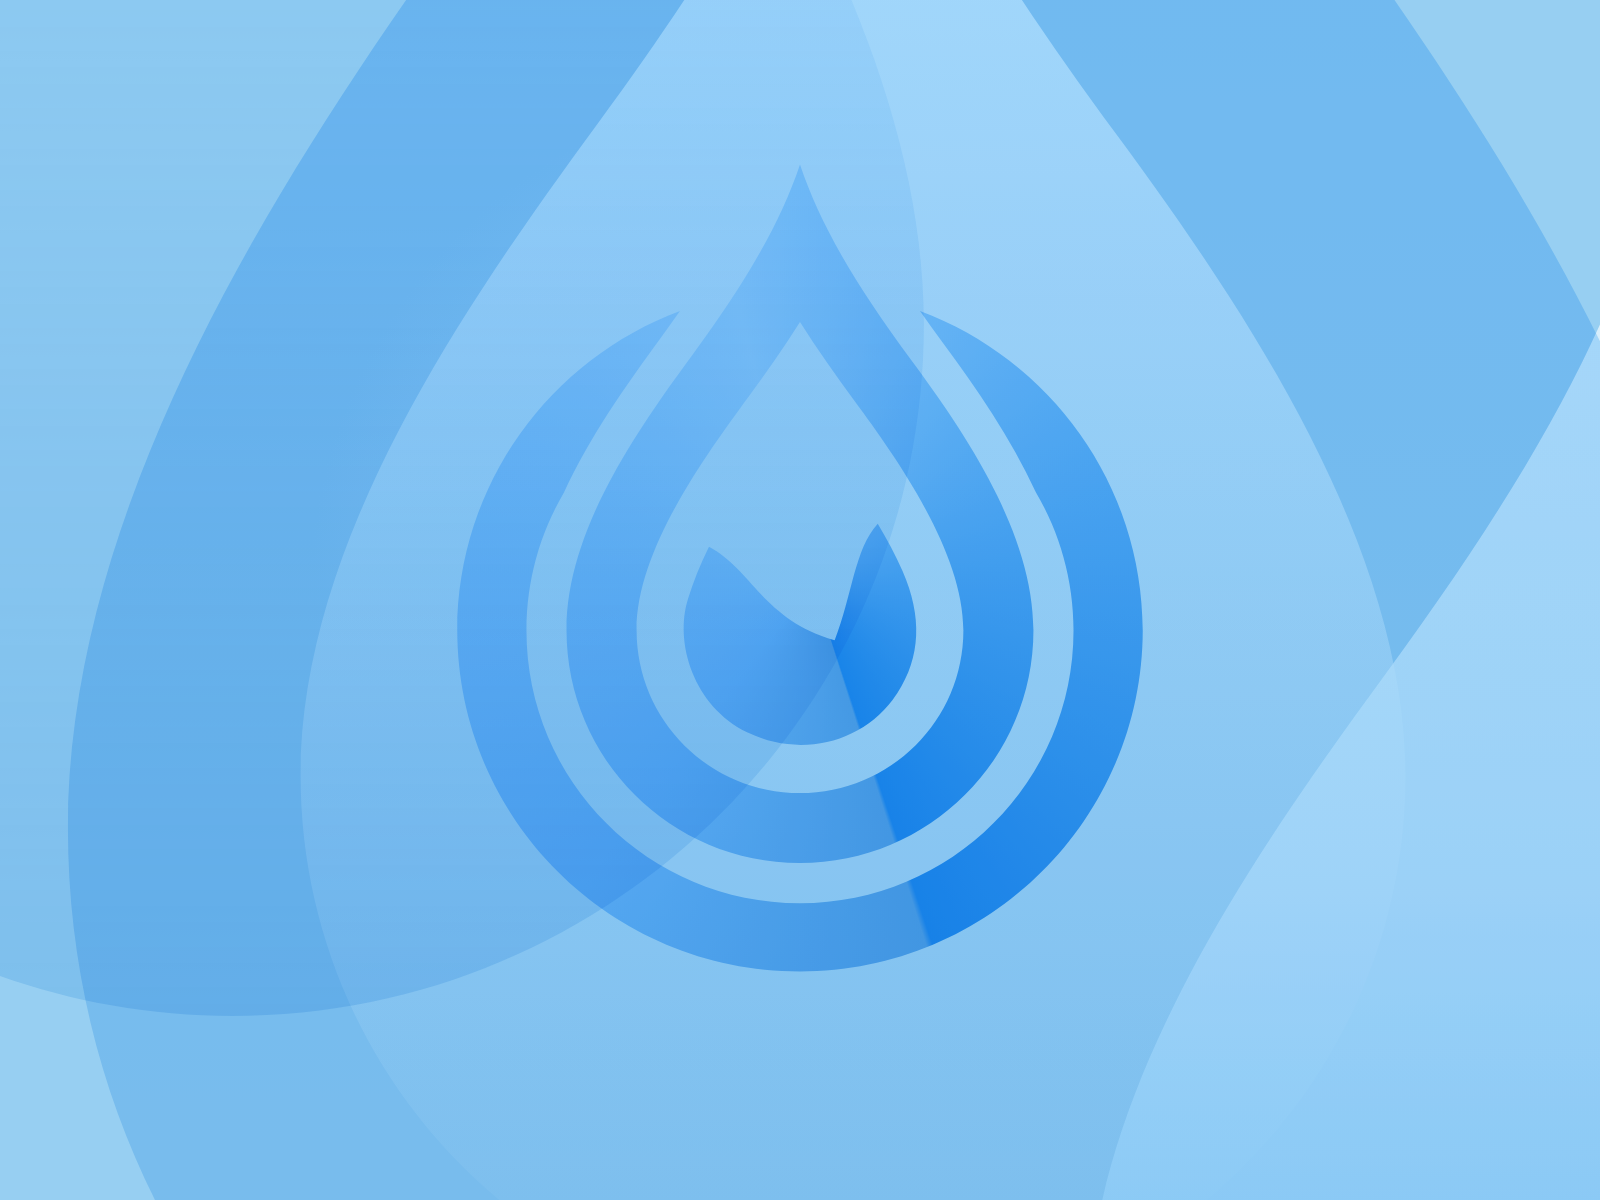 SafeCREW – Safeguarding drinking water supply systems under climate change conditions